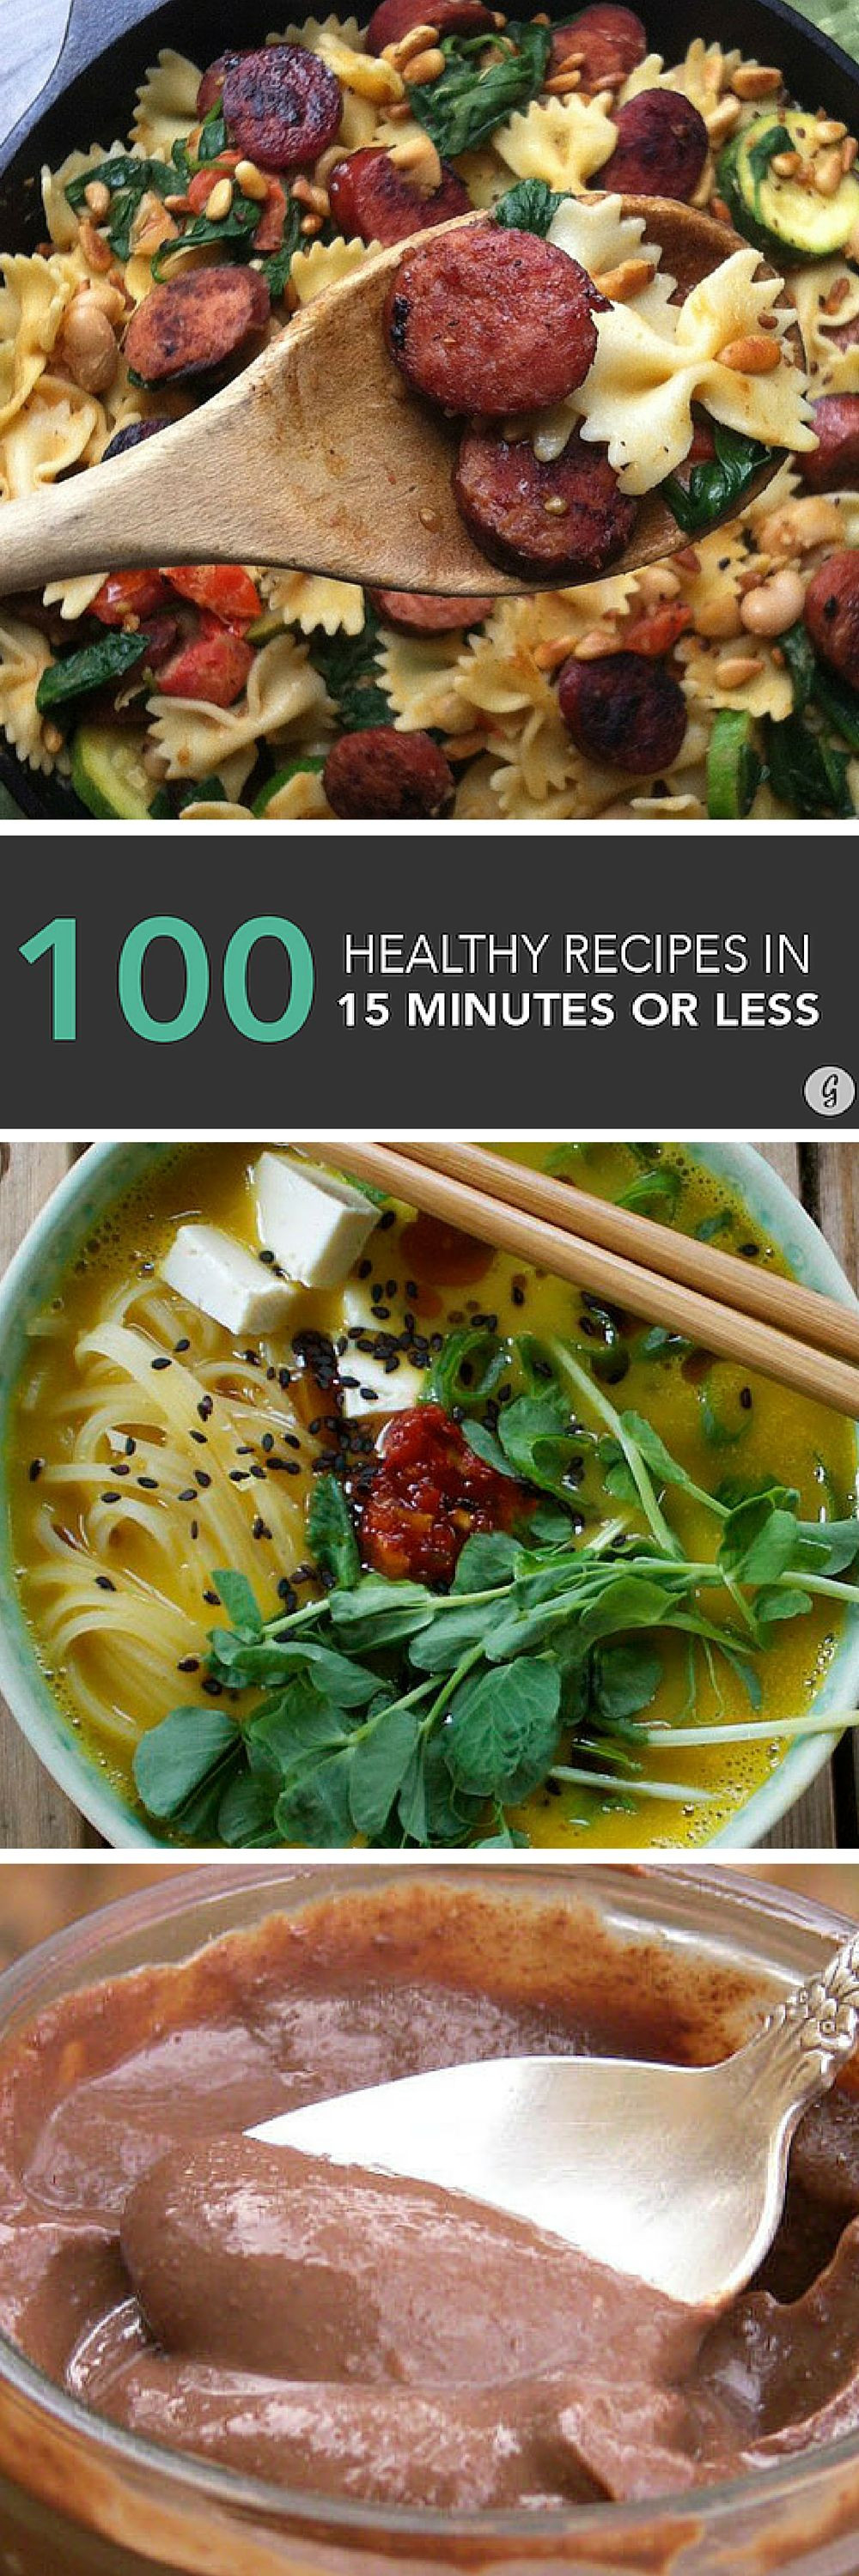 15 Minute Healthy Meals
 100 Healthy Meals Made in 15 Minutes or Less